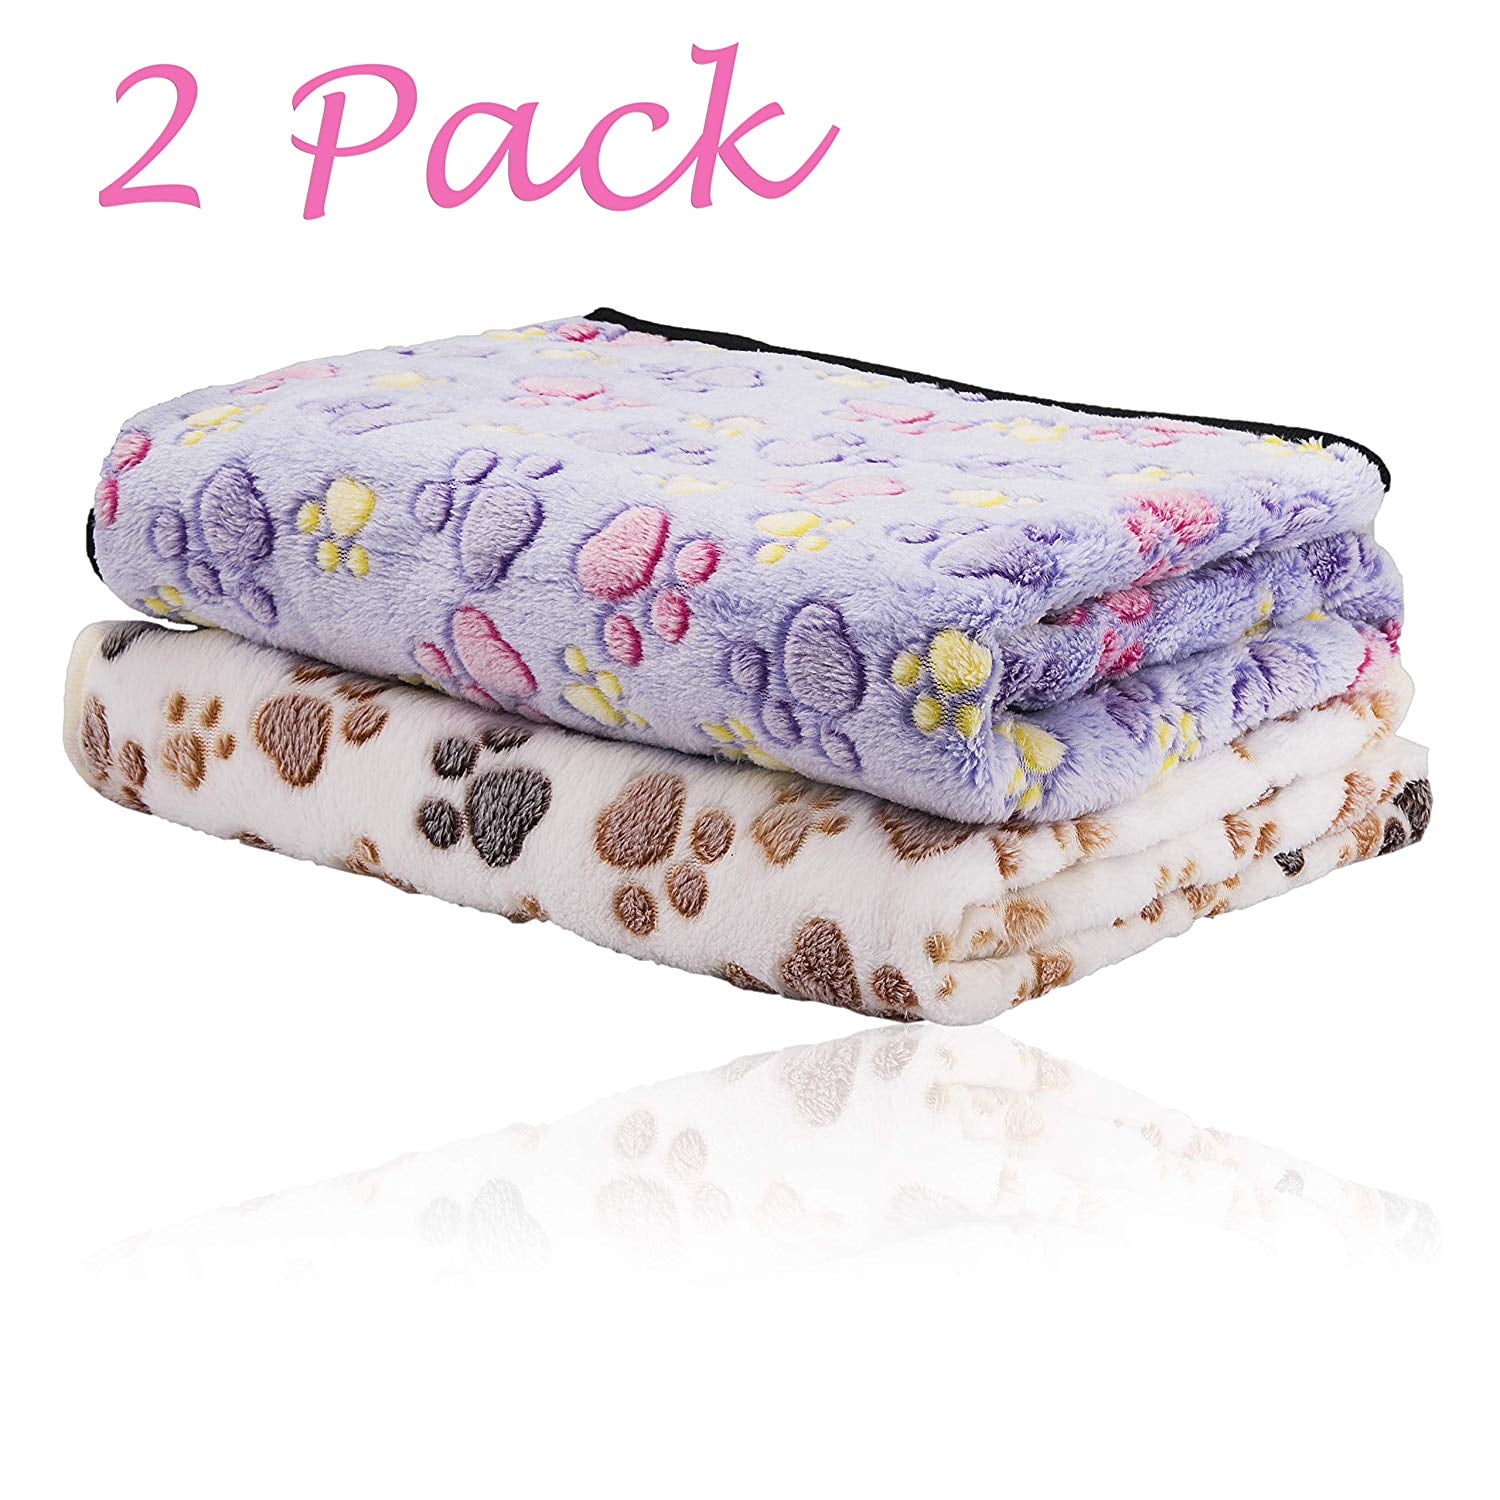 LUXMO 2 Pack Pet Blanket for Small Cats & Dogs, Soft Warm Sleep Mat Pet